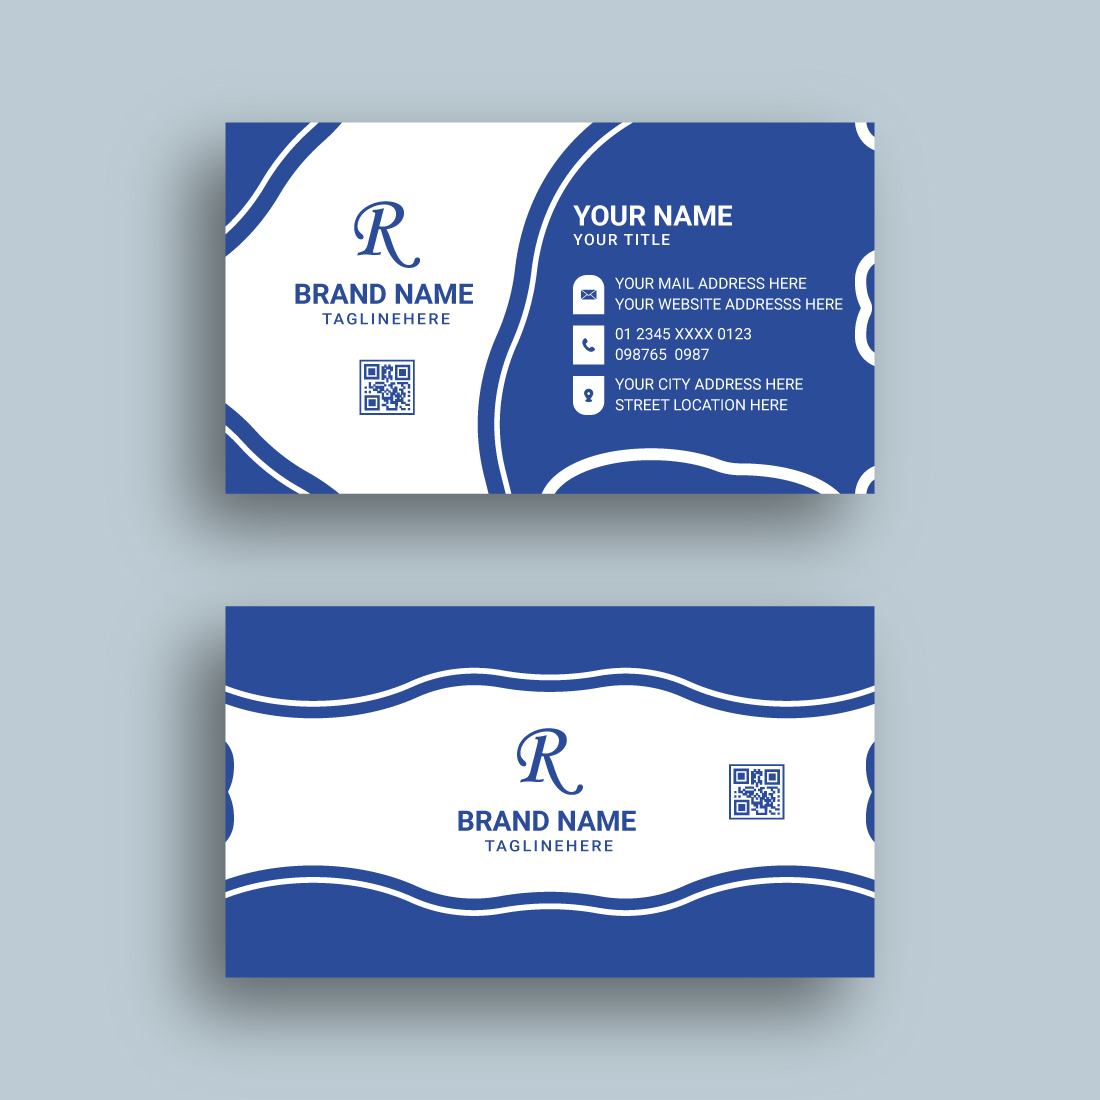 Two business card designs preview image.